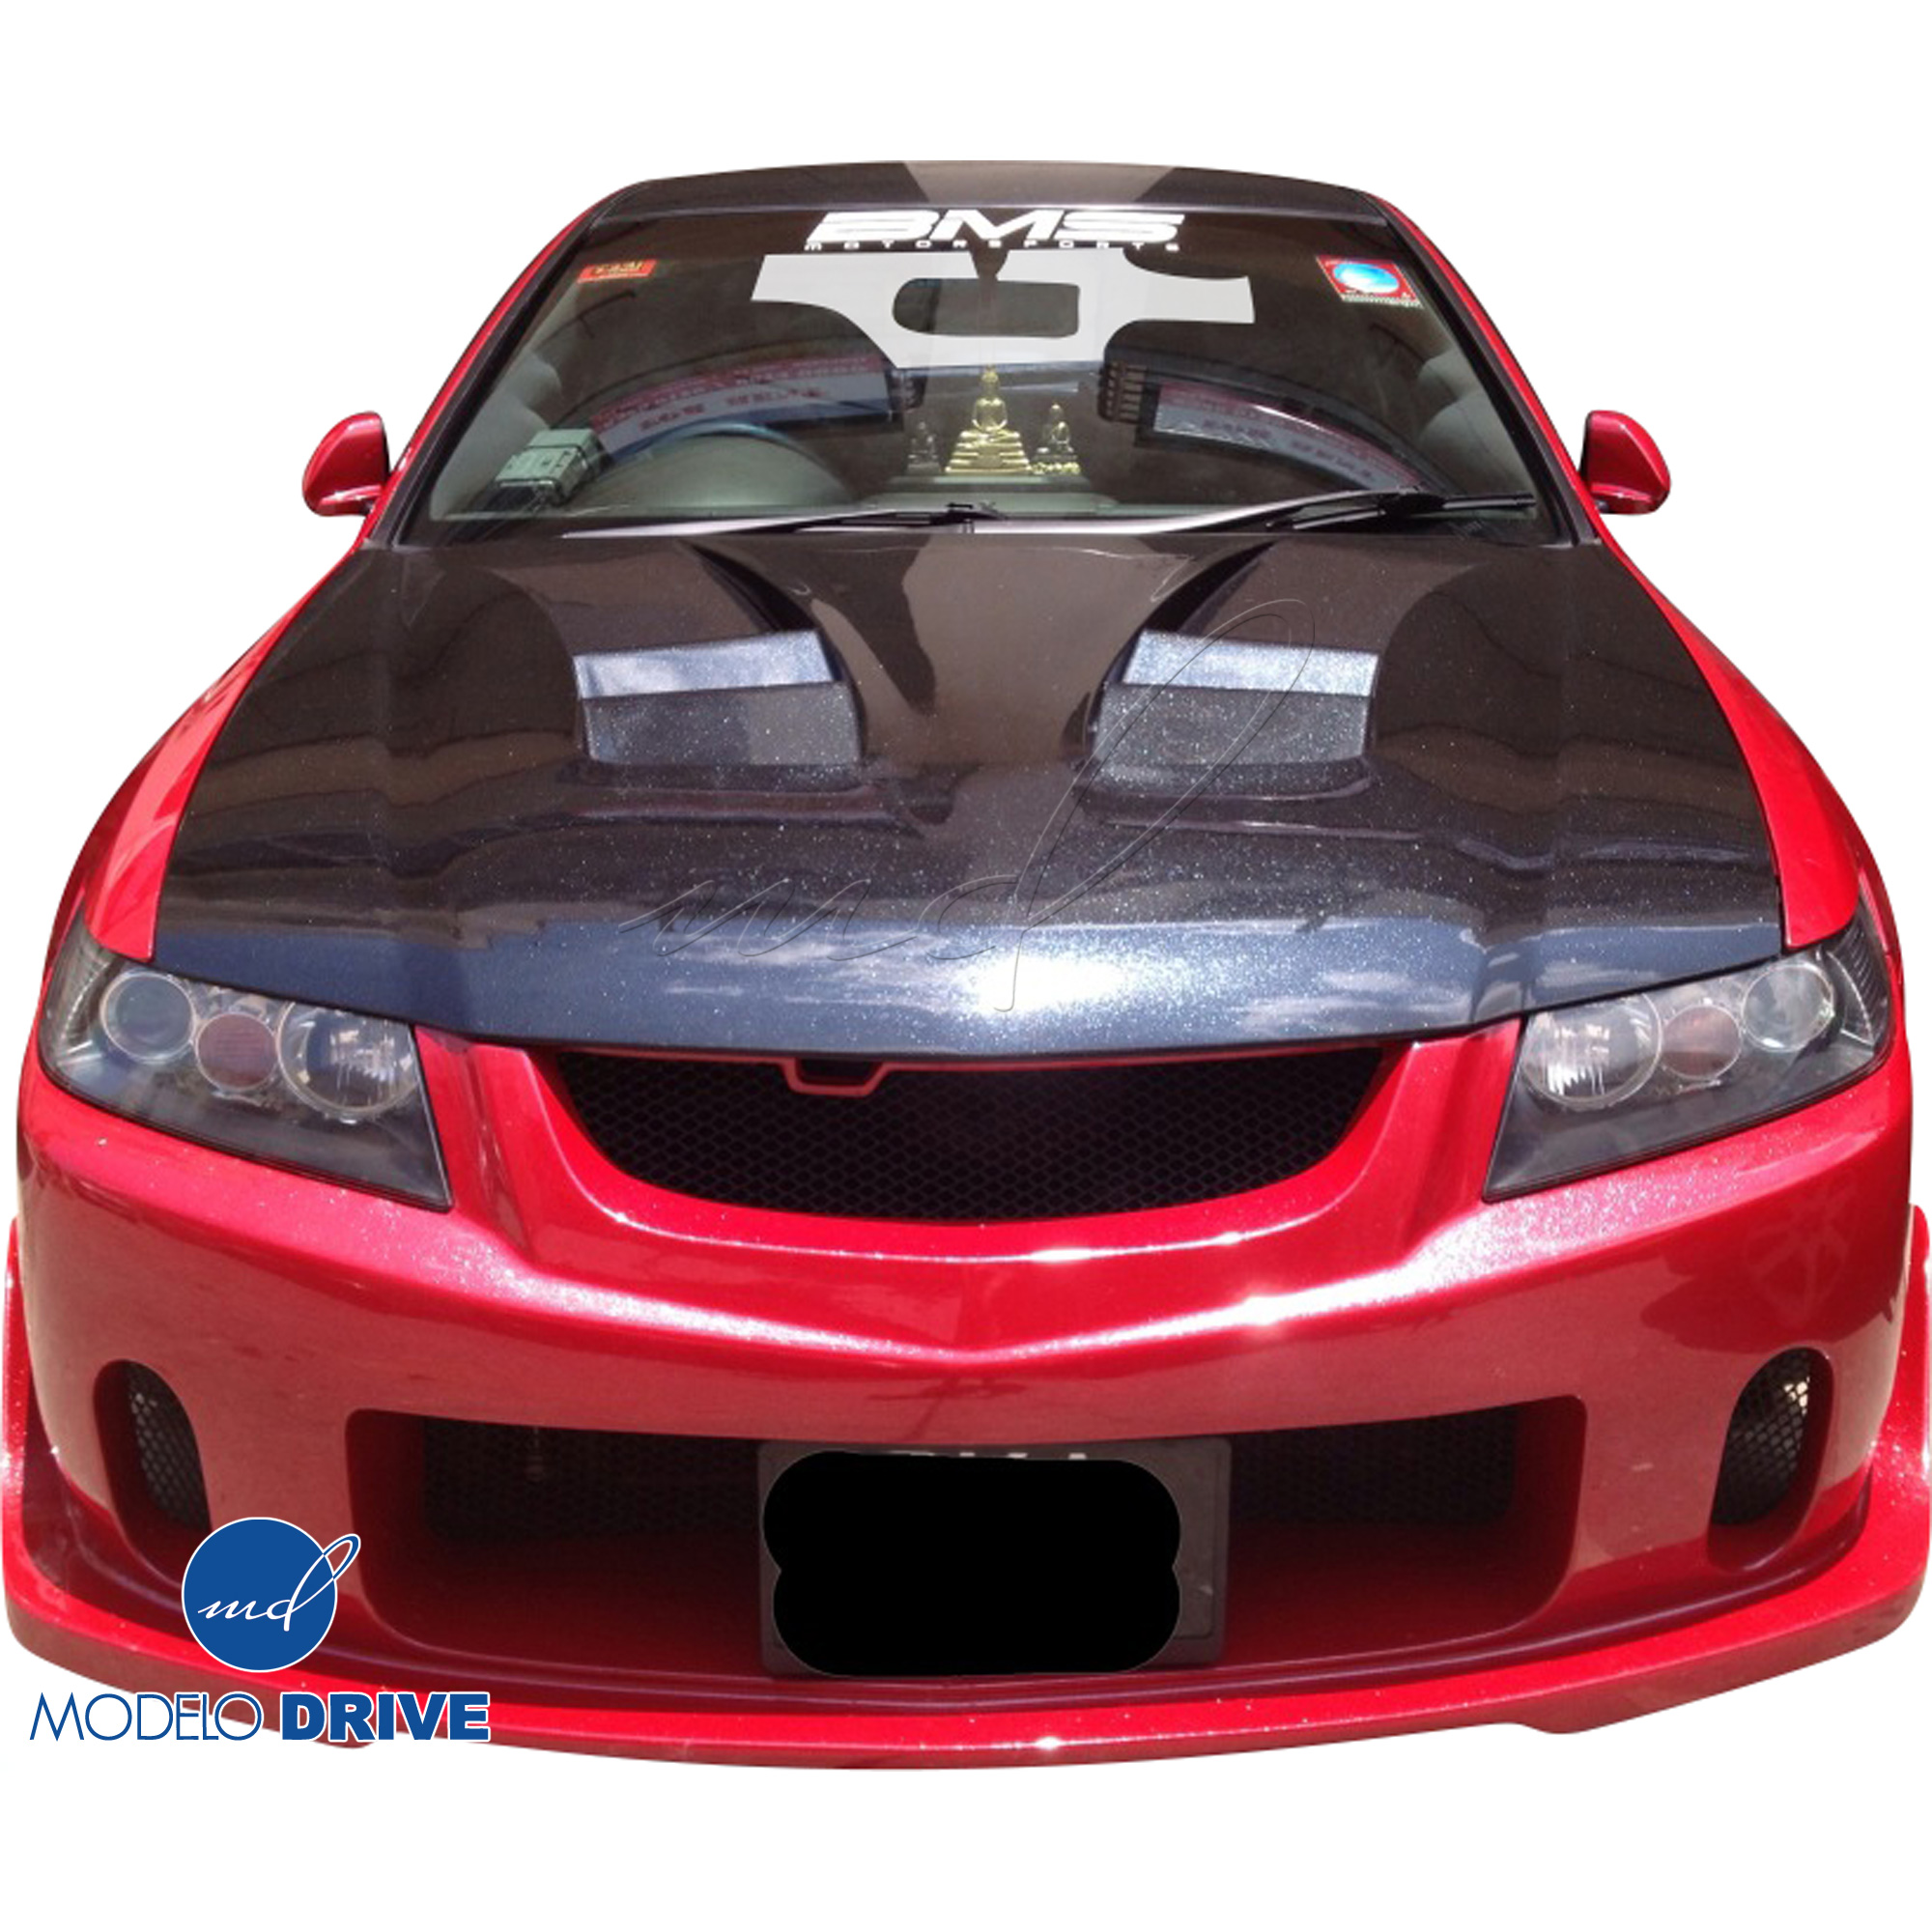 ModeloDrive FRP BC2 Front Bumper > Acura TSX CL9 2004-2008 - Image 5